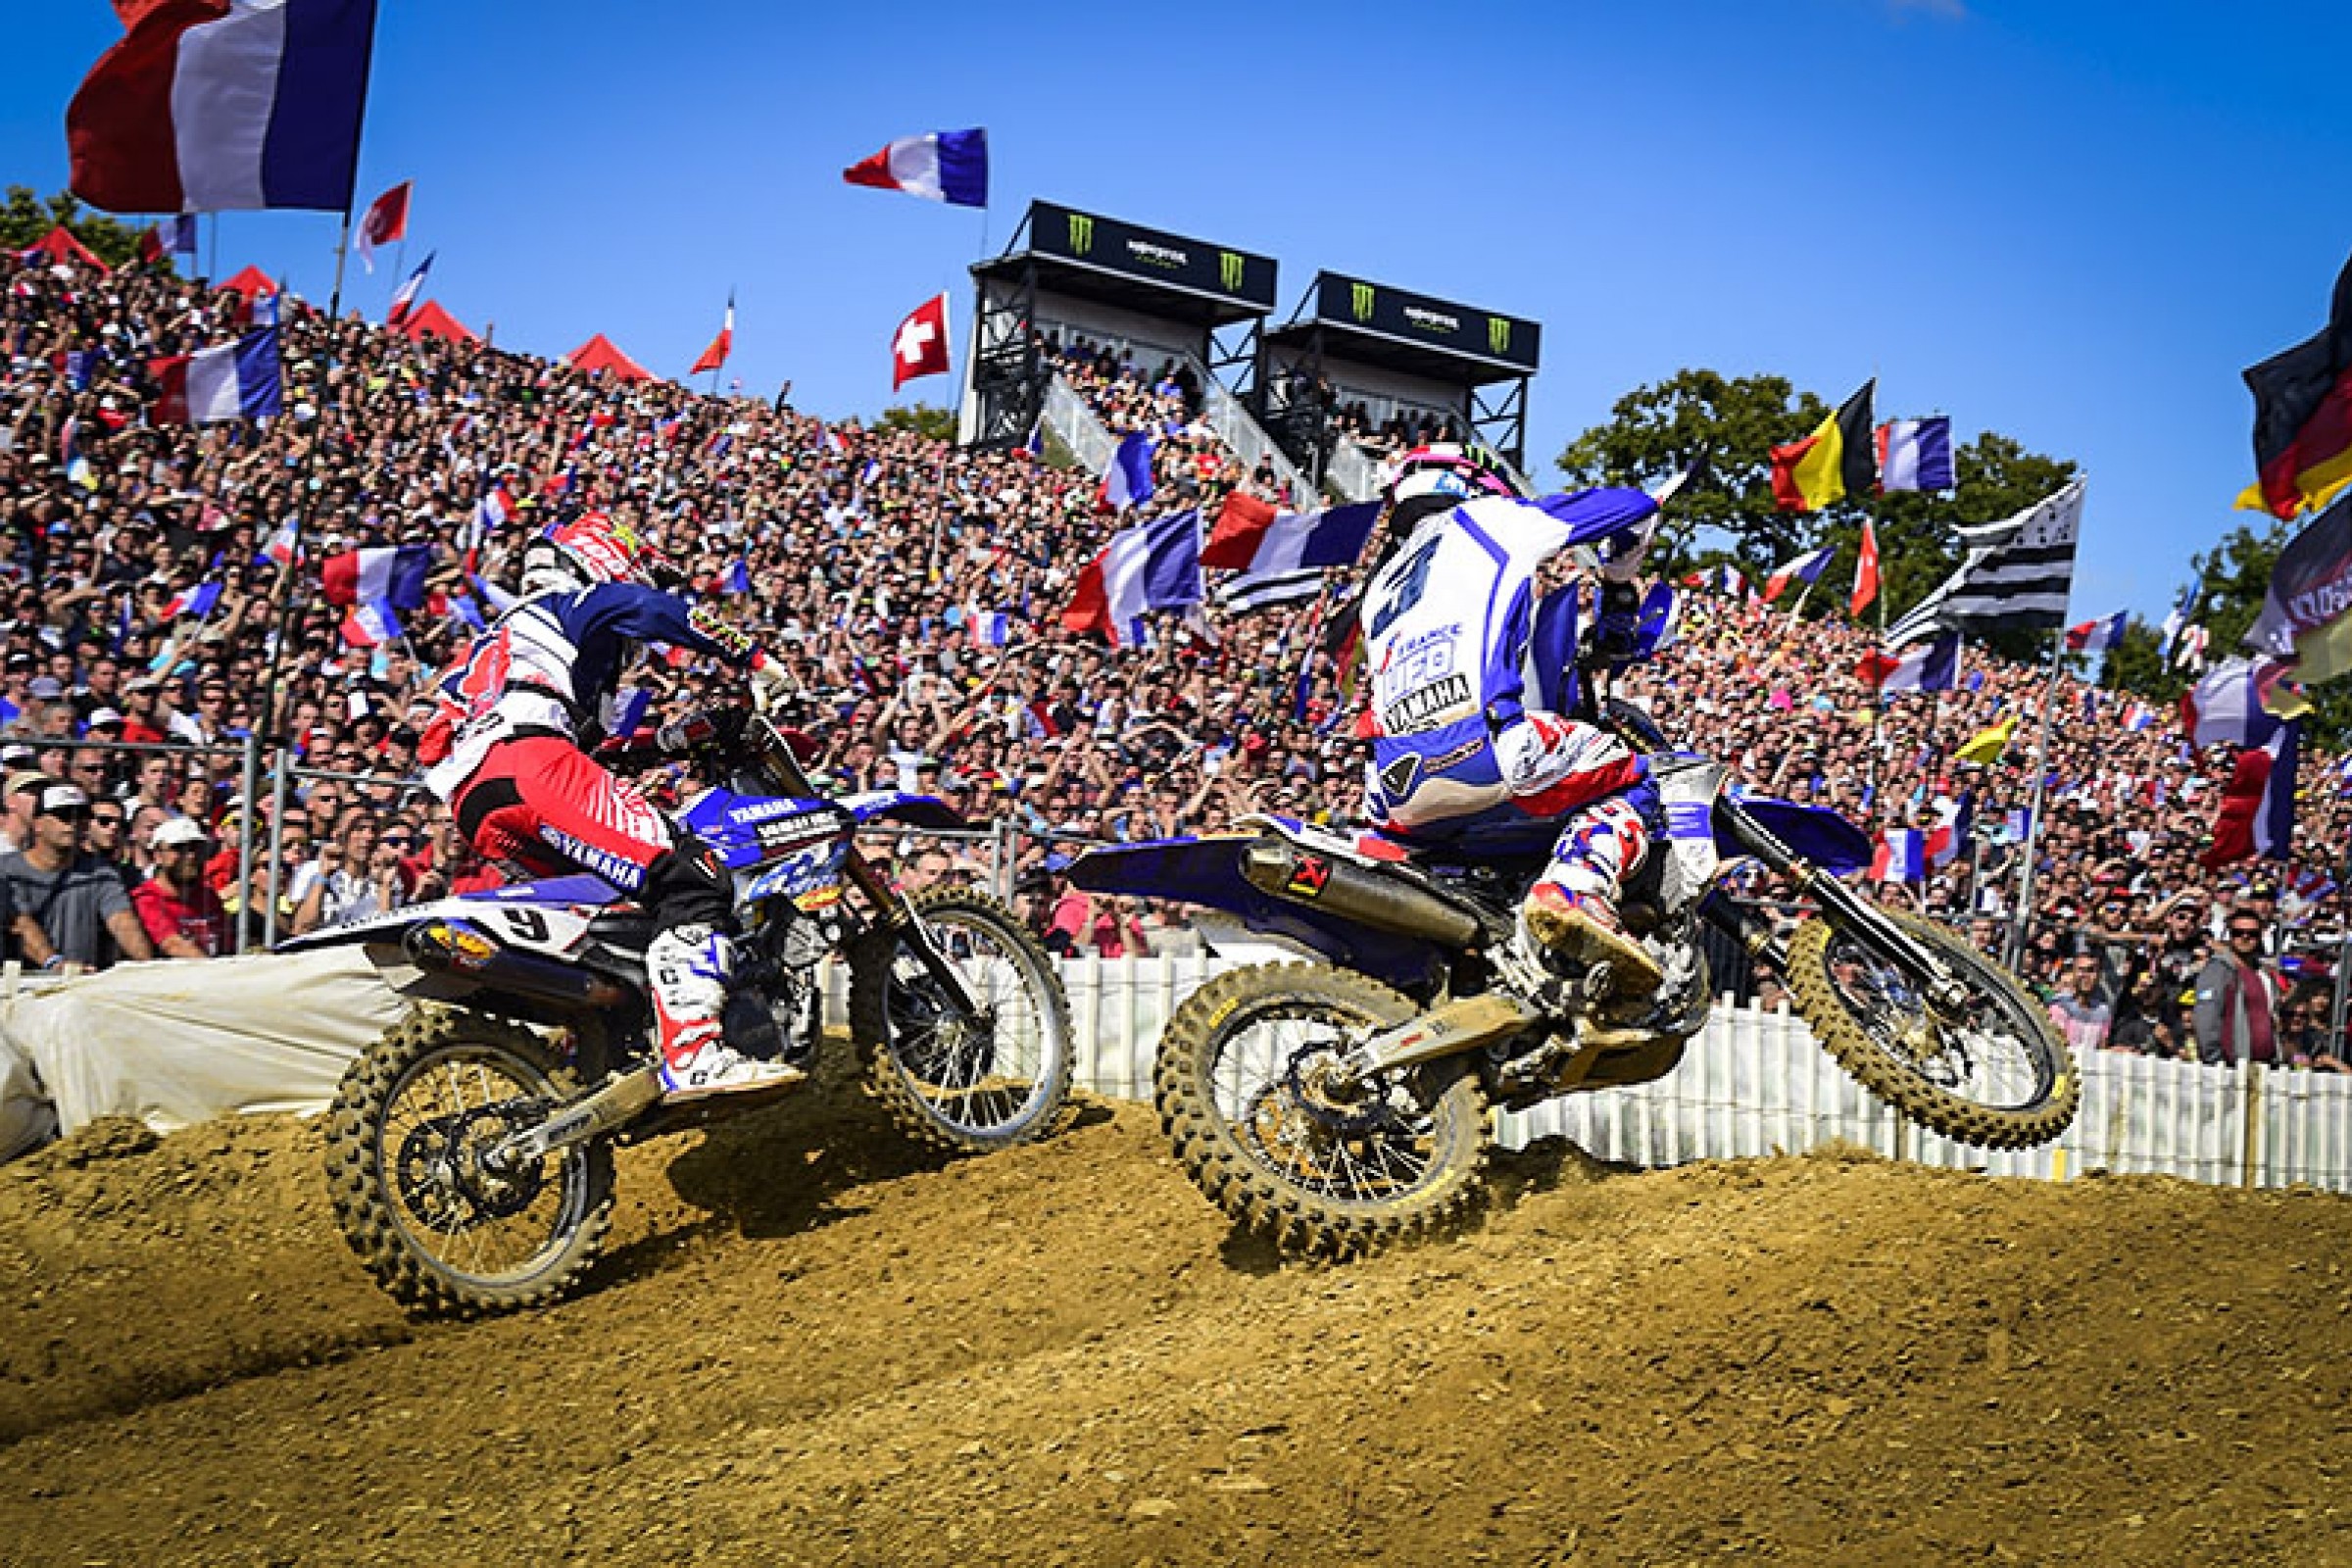 Motocross of Nations to Air Live on CBS Sports Network